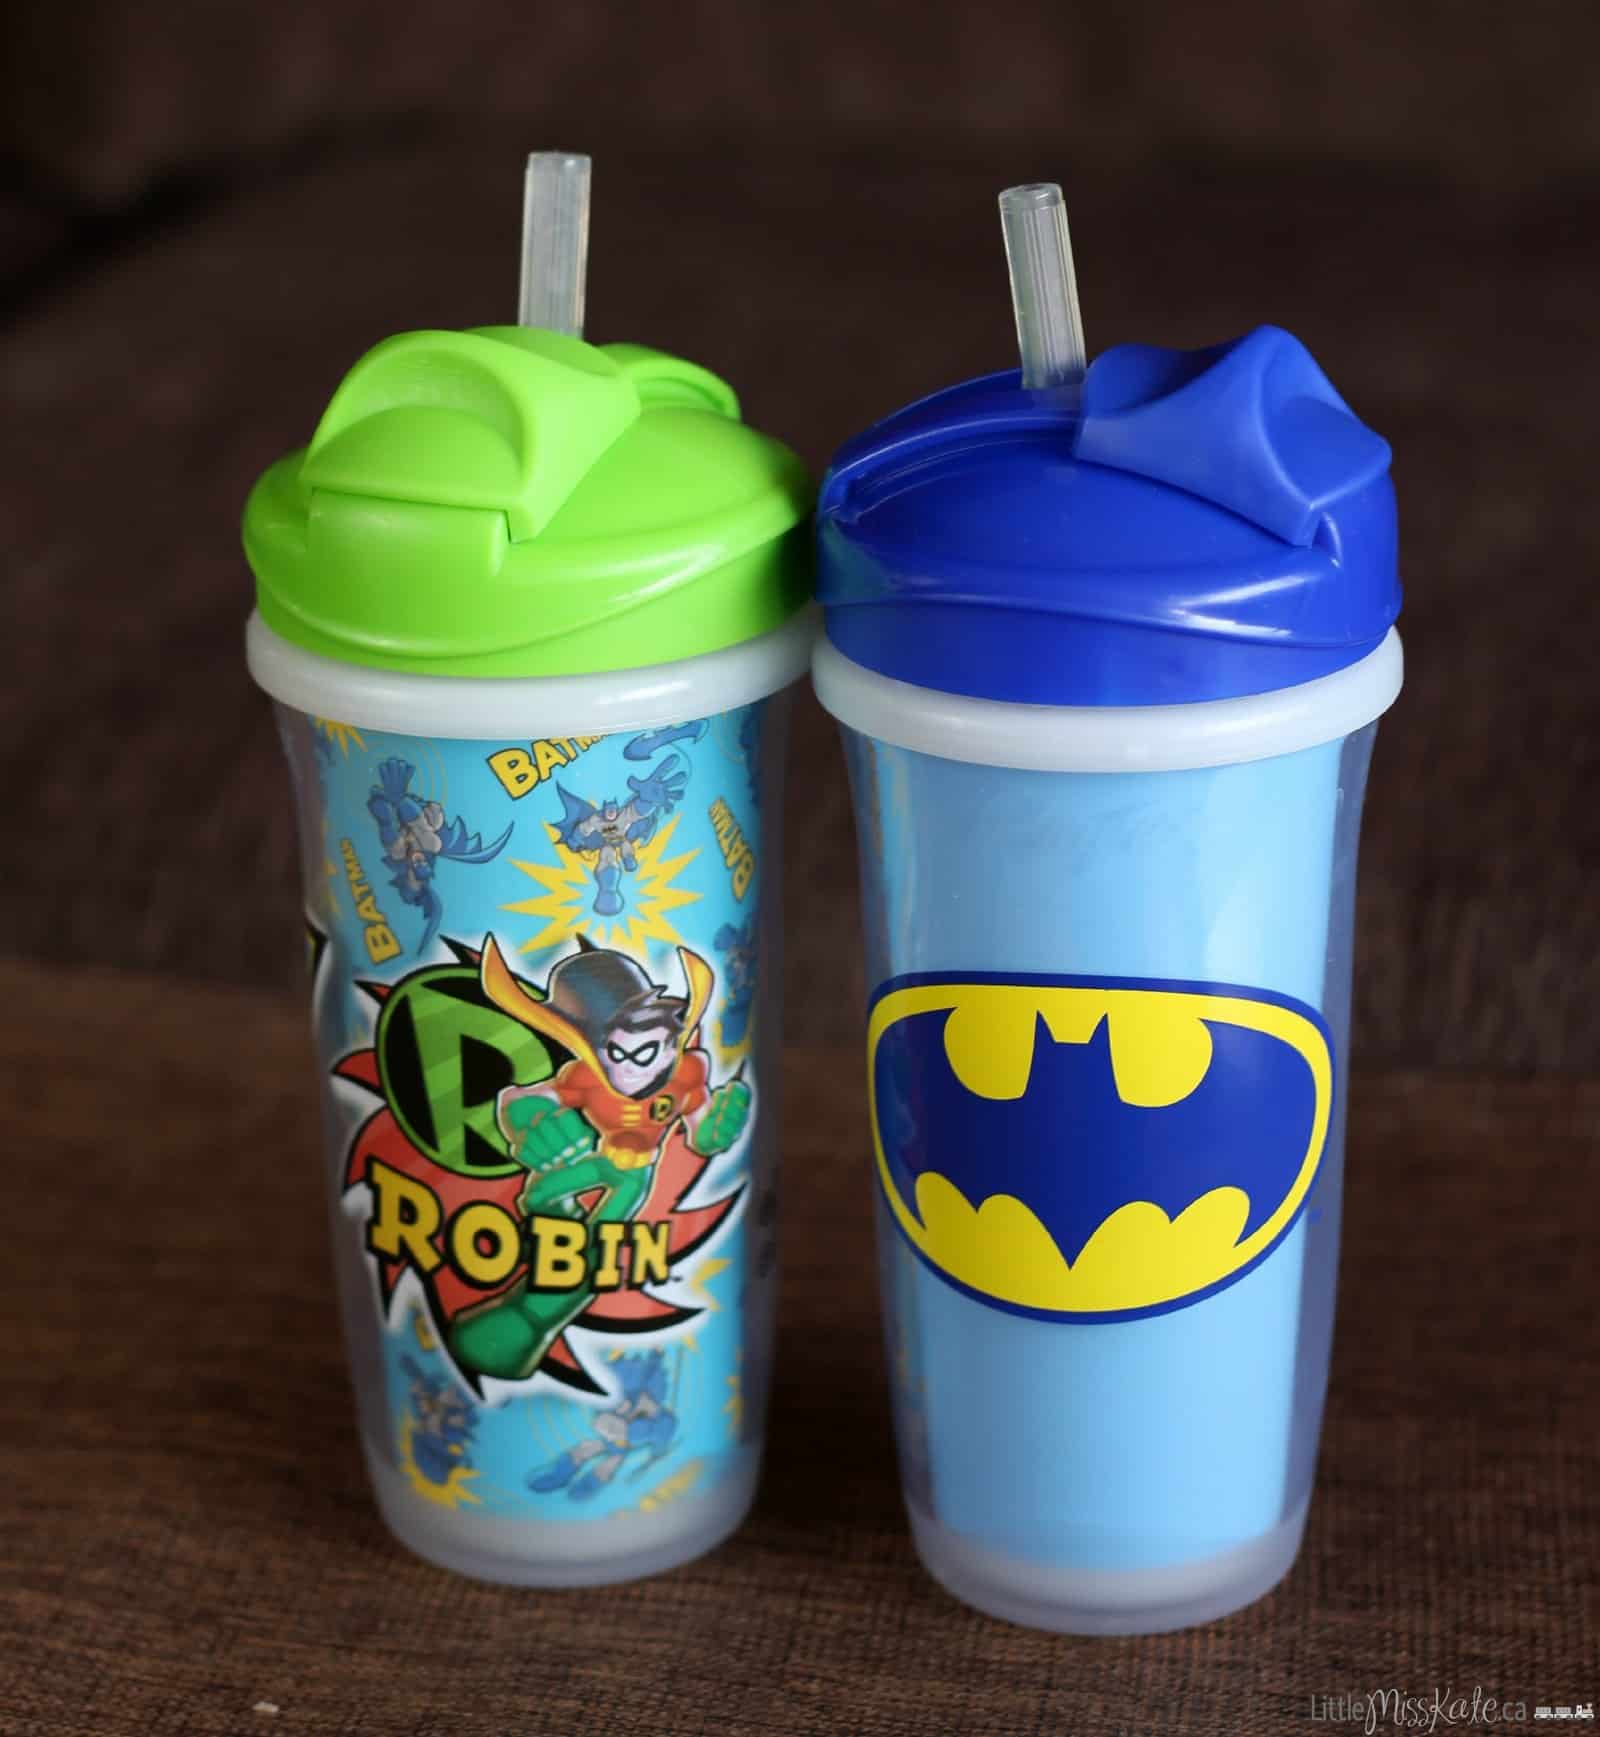 https://theexploringfamily.com/wp-content/uploads/2015/05/no-leak-sippy-cup-playtex-playtime-cup-02.jpg